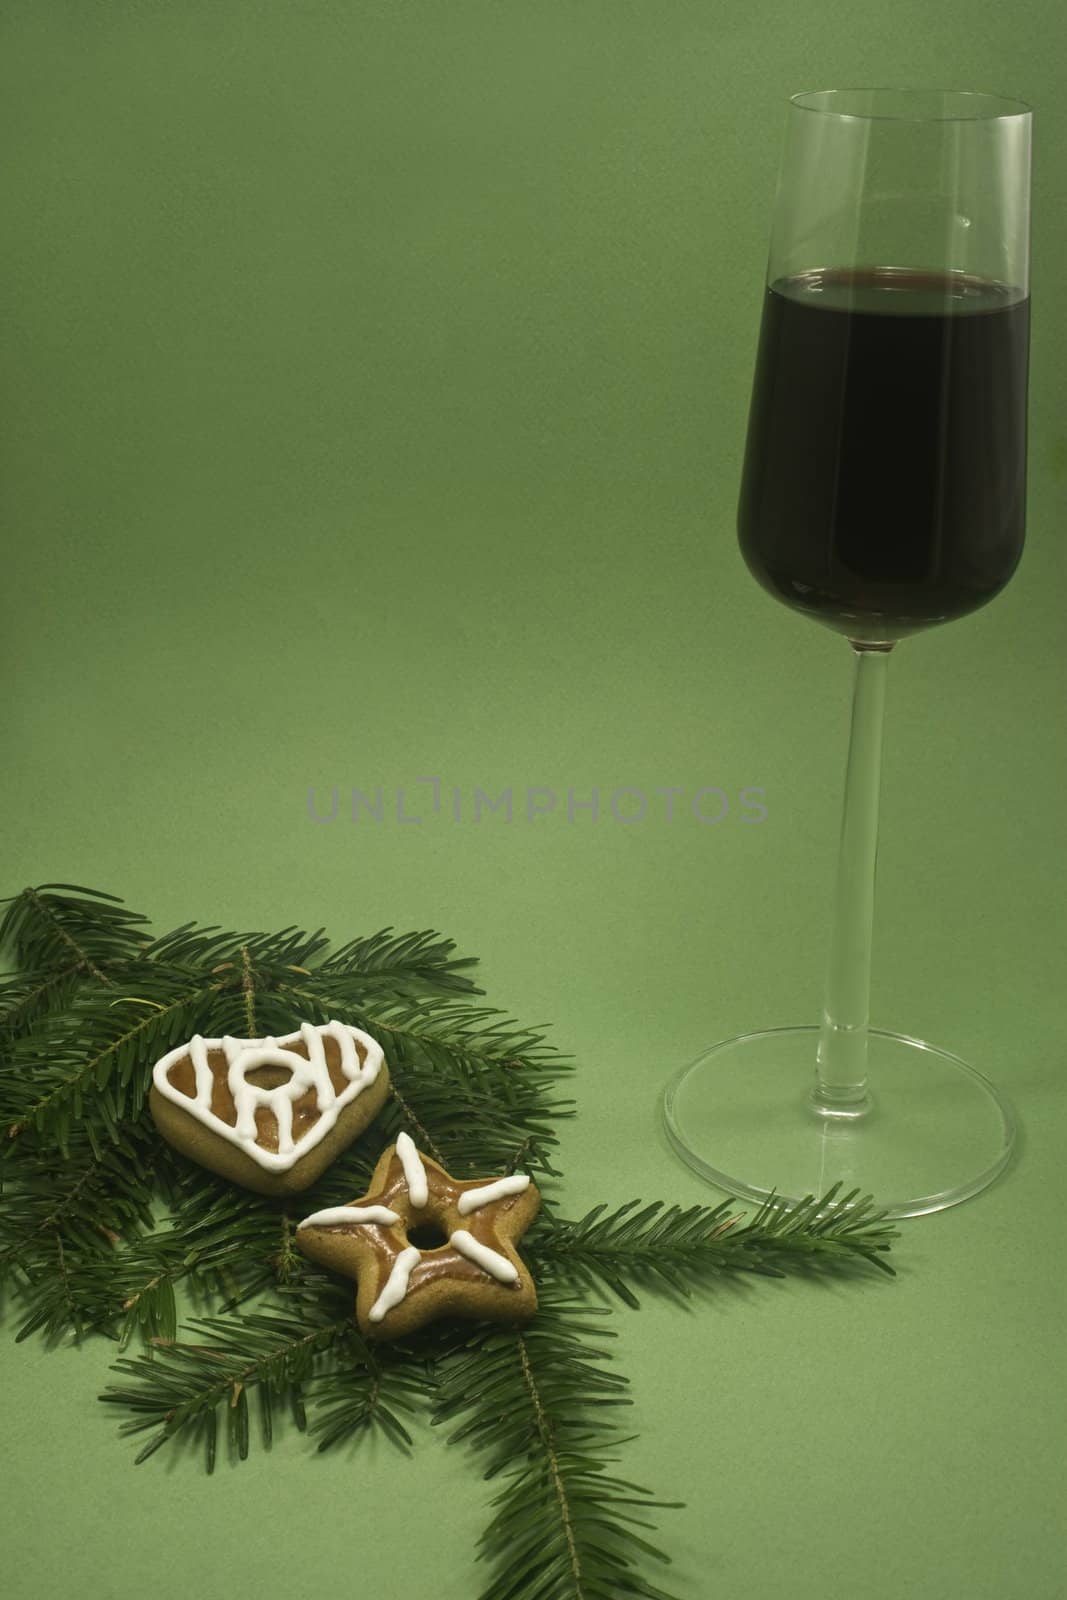 Wine and Christmas cookie by timscottrom